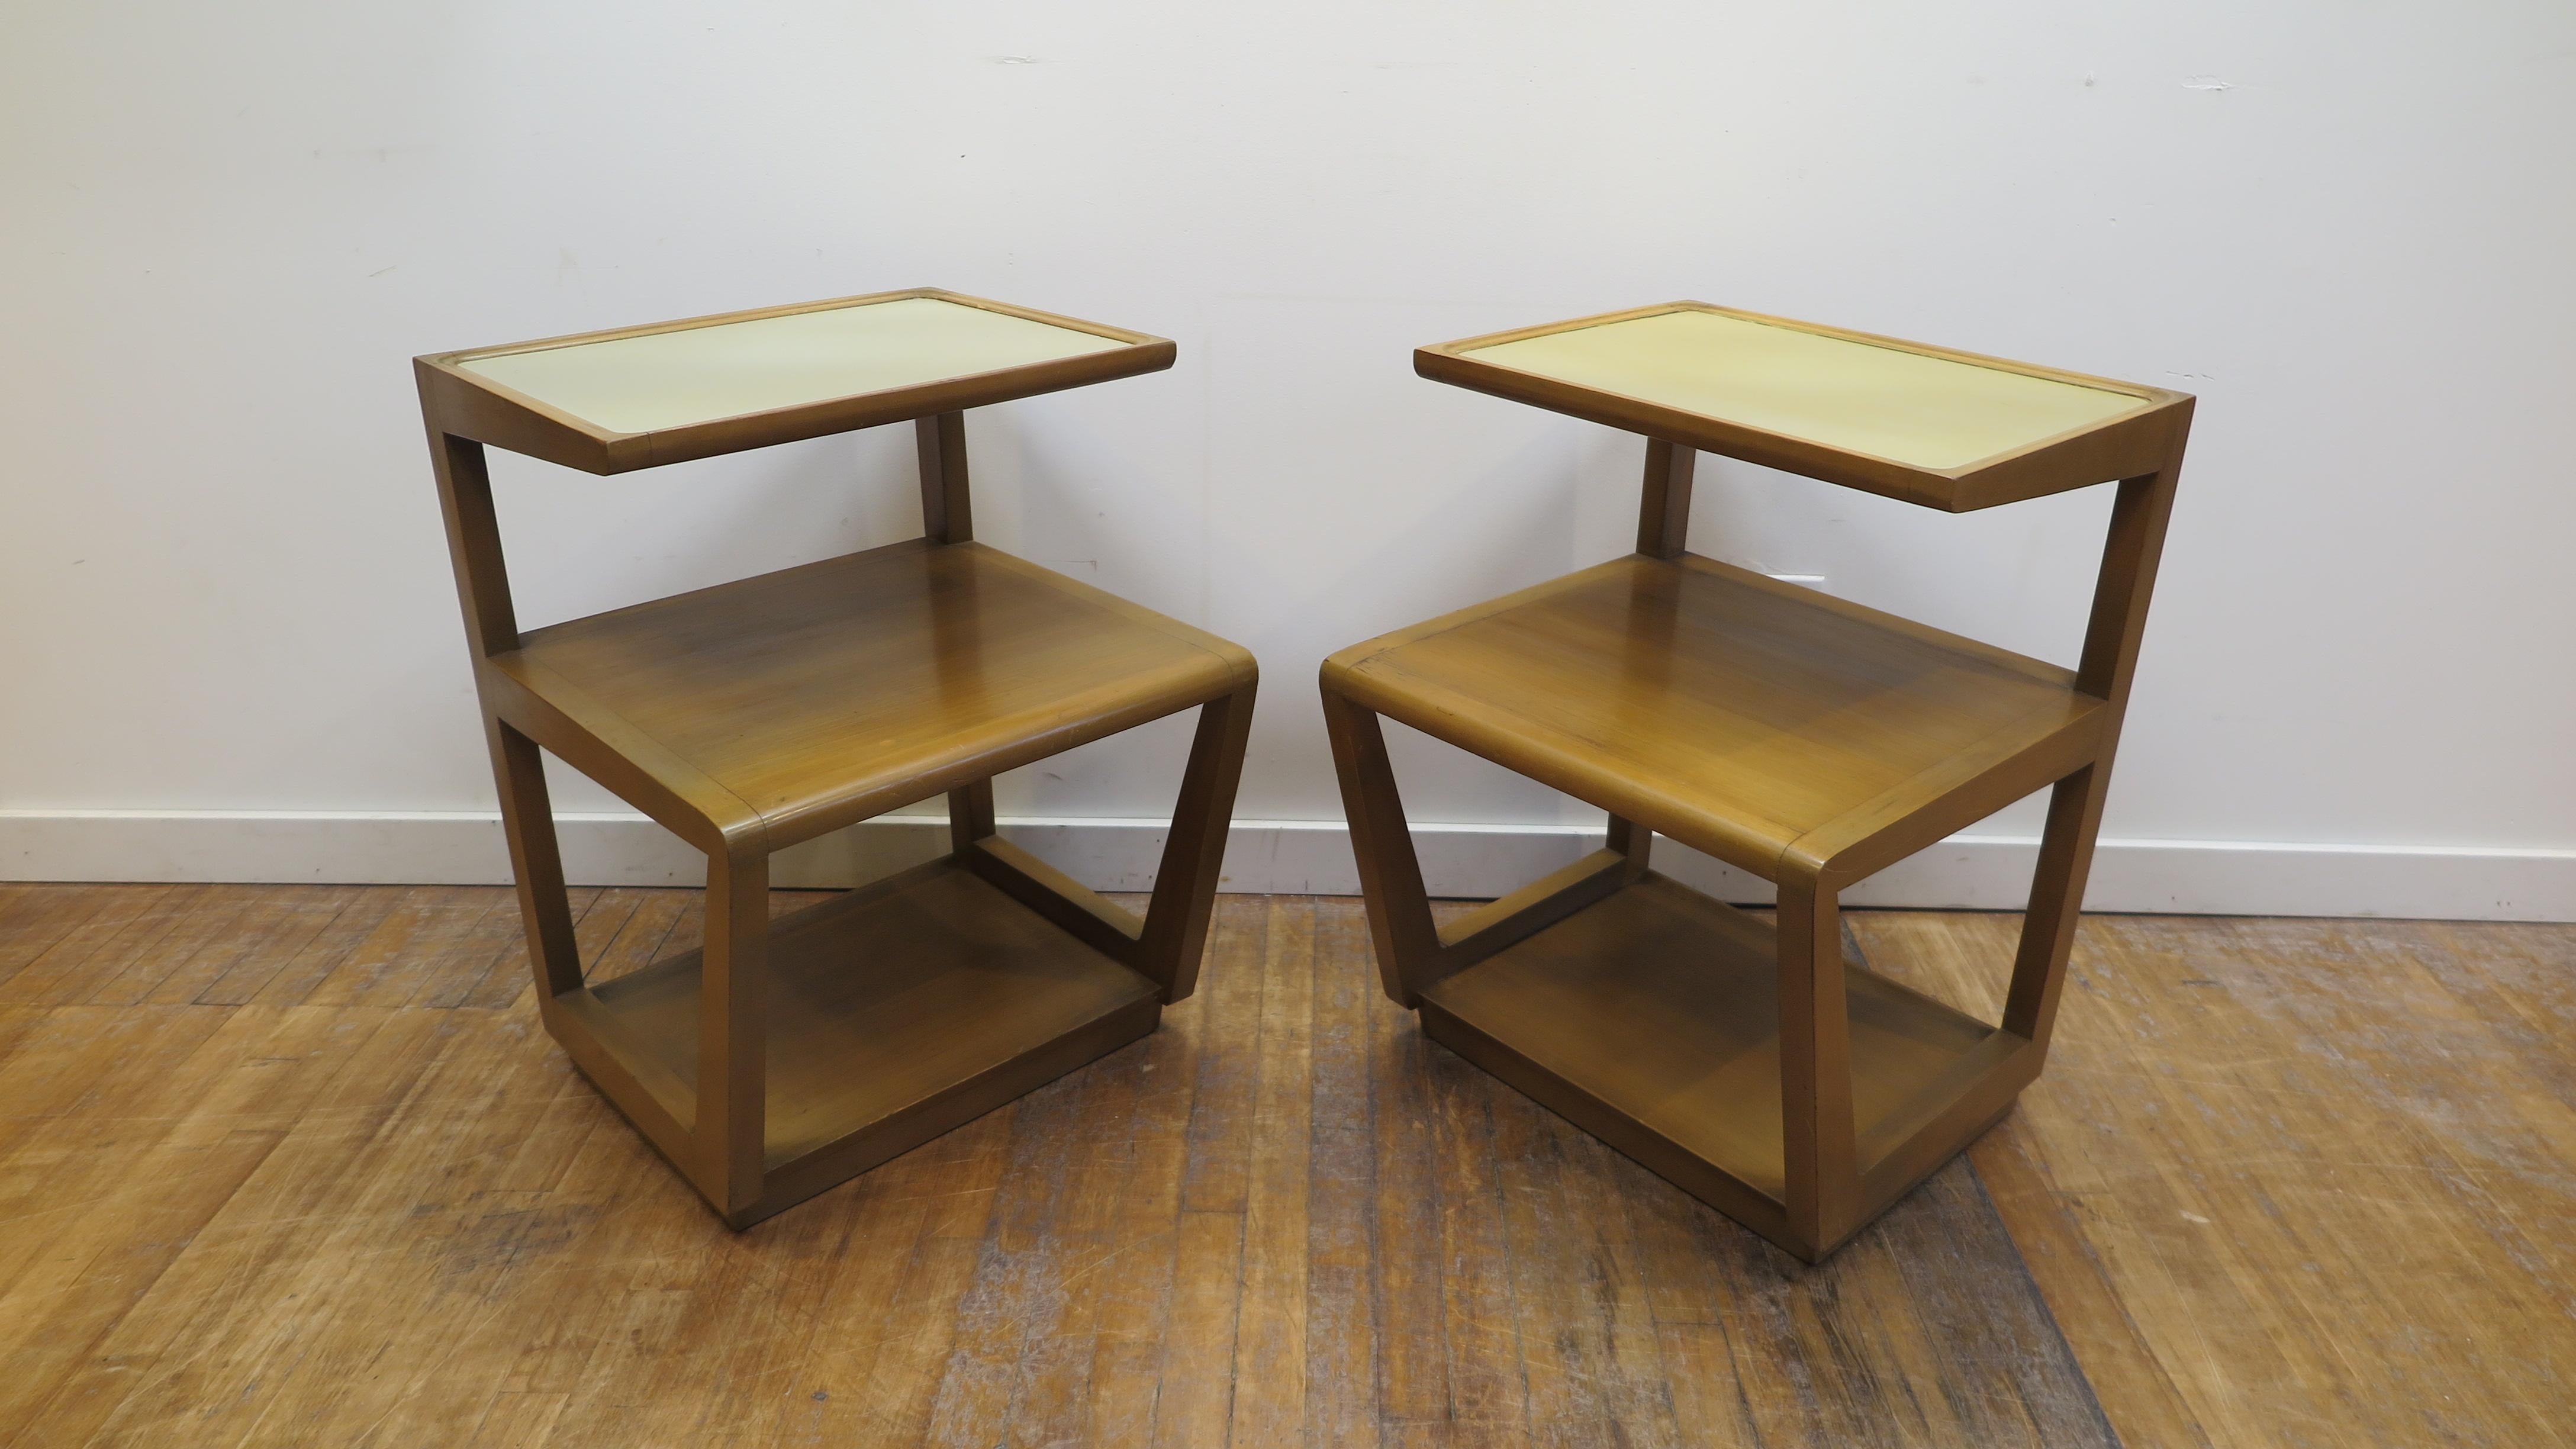 Pair of Edward Wormley tiered end tables precedent line for Drexel. An early pair of Edward Wormley modernism designed end tables. Architecturally brilliant and stunning these tables are sought after by collectors. Their amazing lines with the